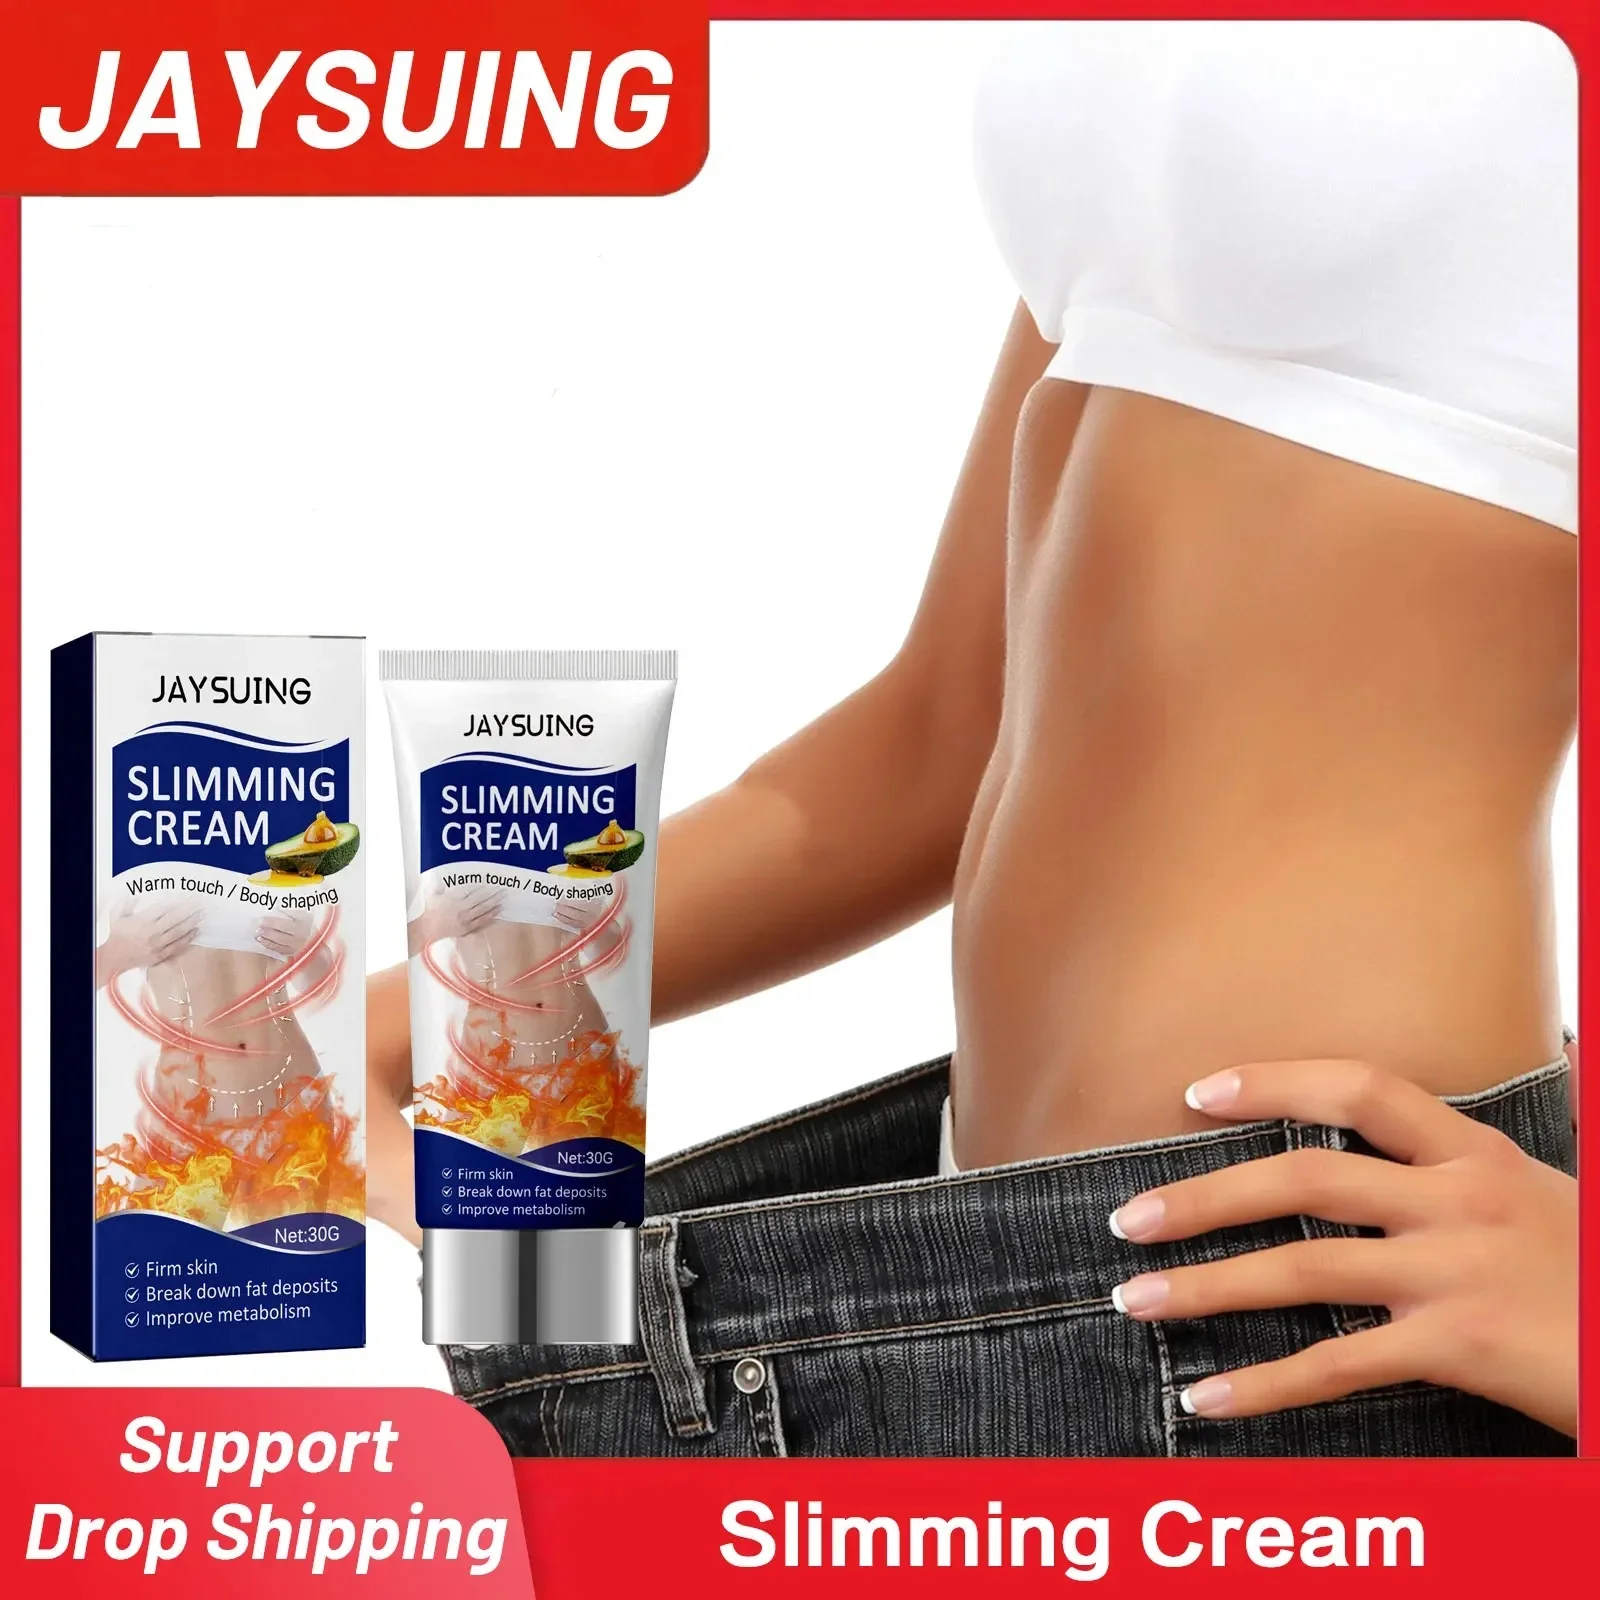 Fat Burning Cream Remove Cellulite Lose Weight Tightening Abdomen Arms Thighs Lifting Firming Fat Body Shaping Slimming Cream